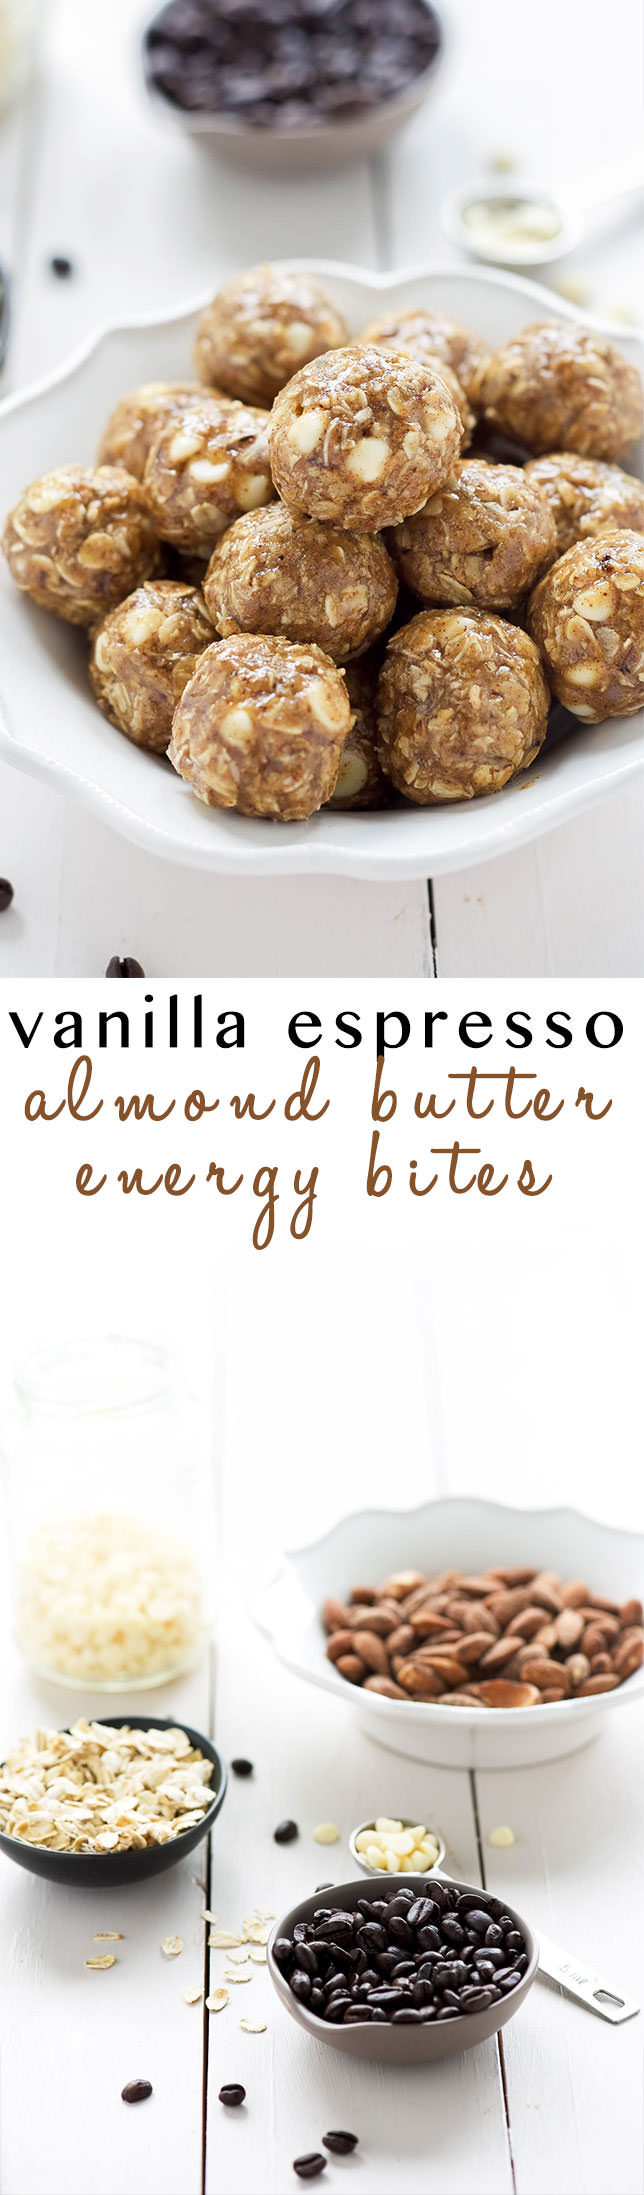 These Vanilla Espresso Almond Butter Energy Bites come in handy when you need more than just a cup of joe in the morning! Filled with hearty oats, almond butter, coffee and white chocolate chips; they are a healthy snack or treat! 